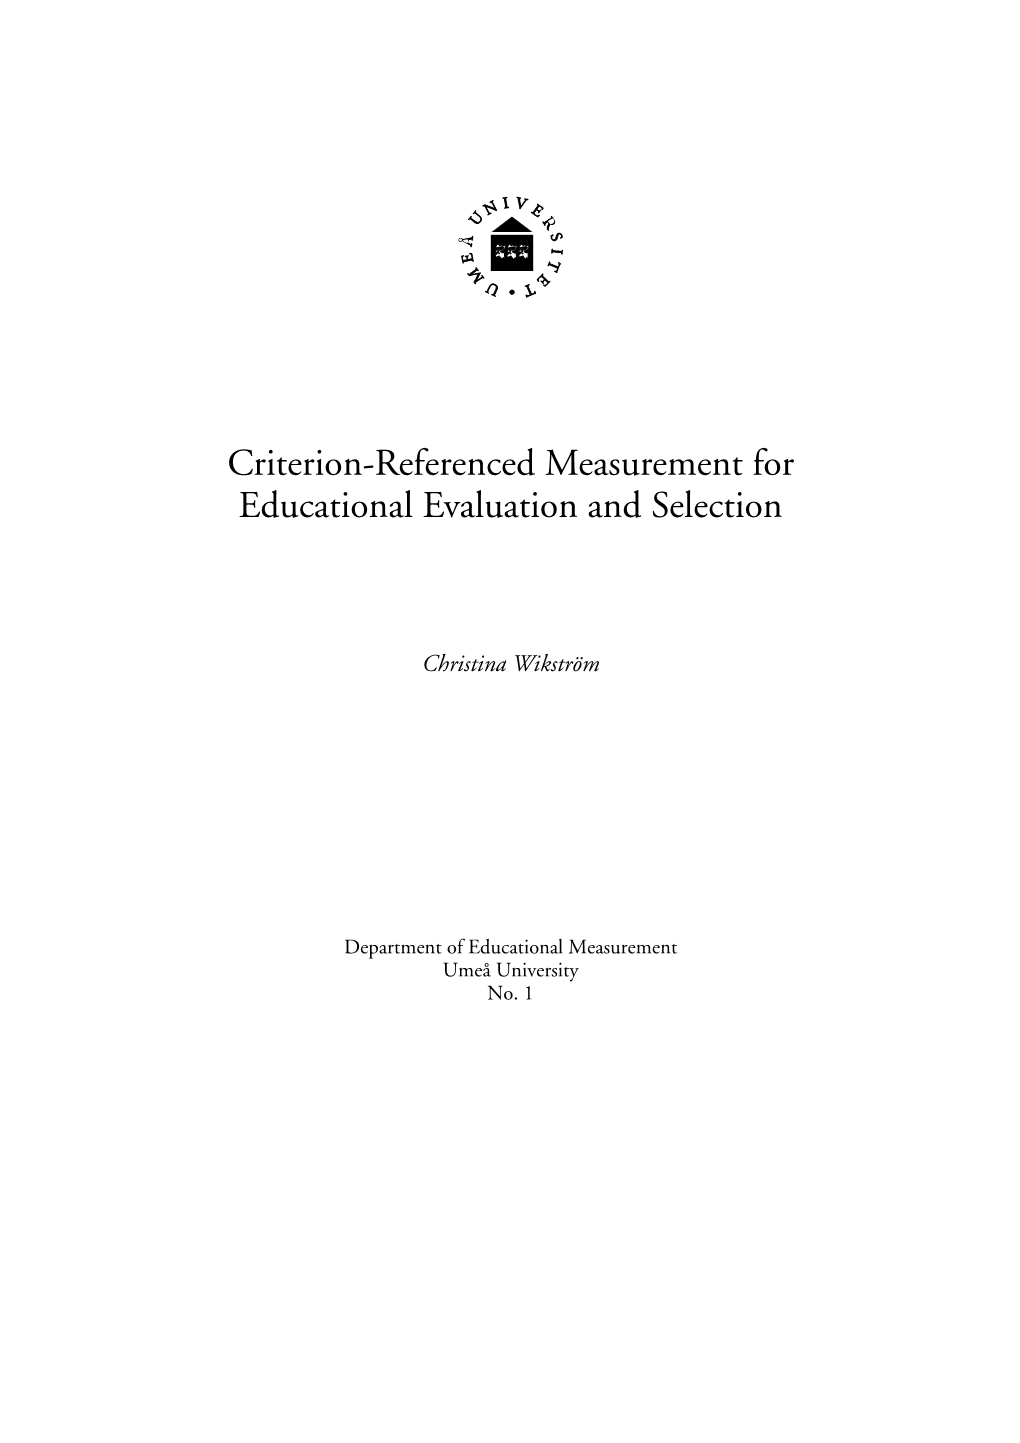 Criterion-Referenced Measurement for Educational Evaluation and Selection